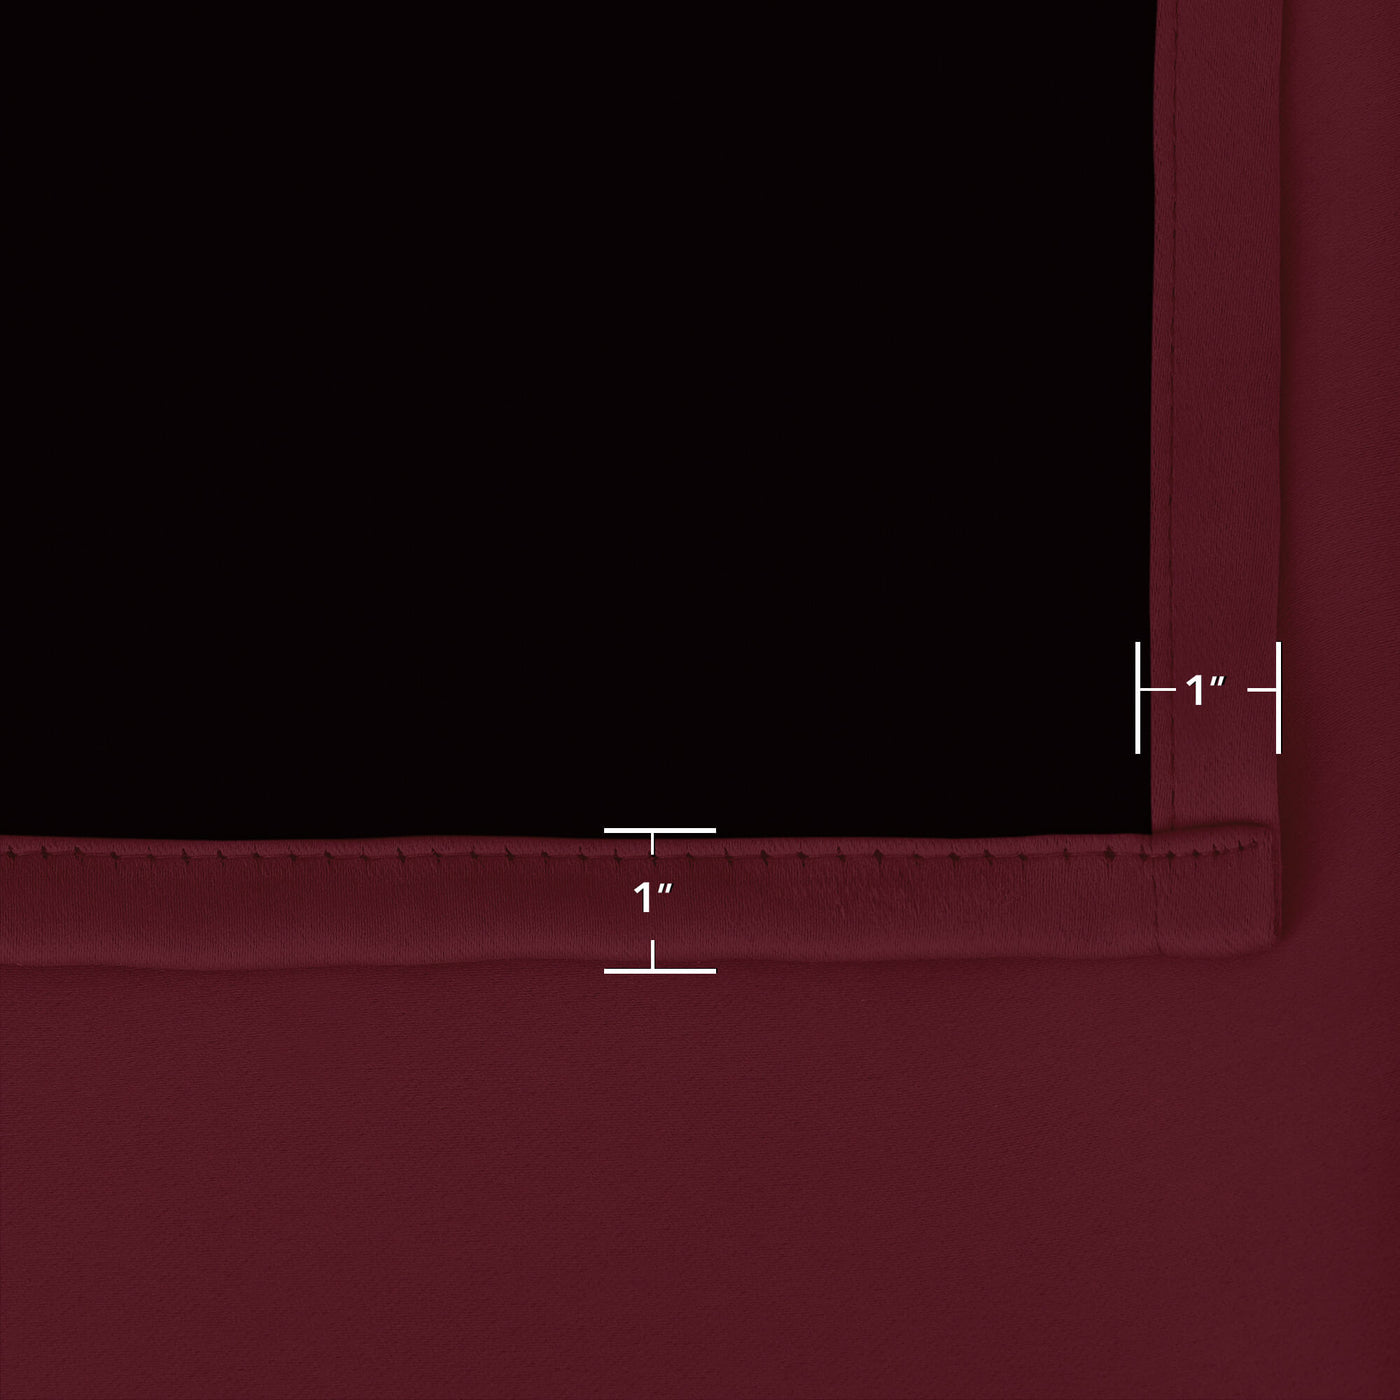 Heartcosy Blackout Curtains Wine Red - Tab Top